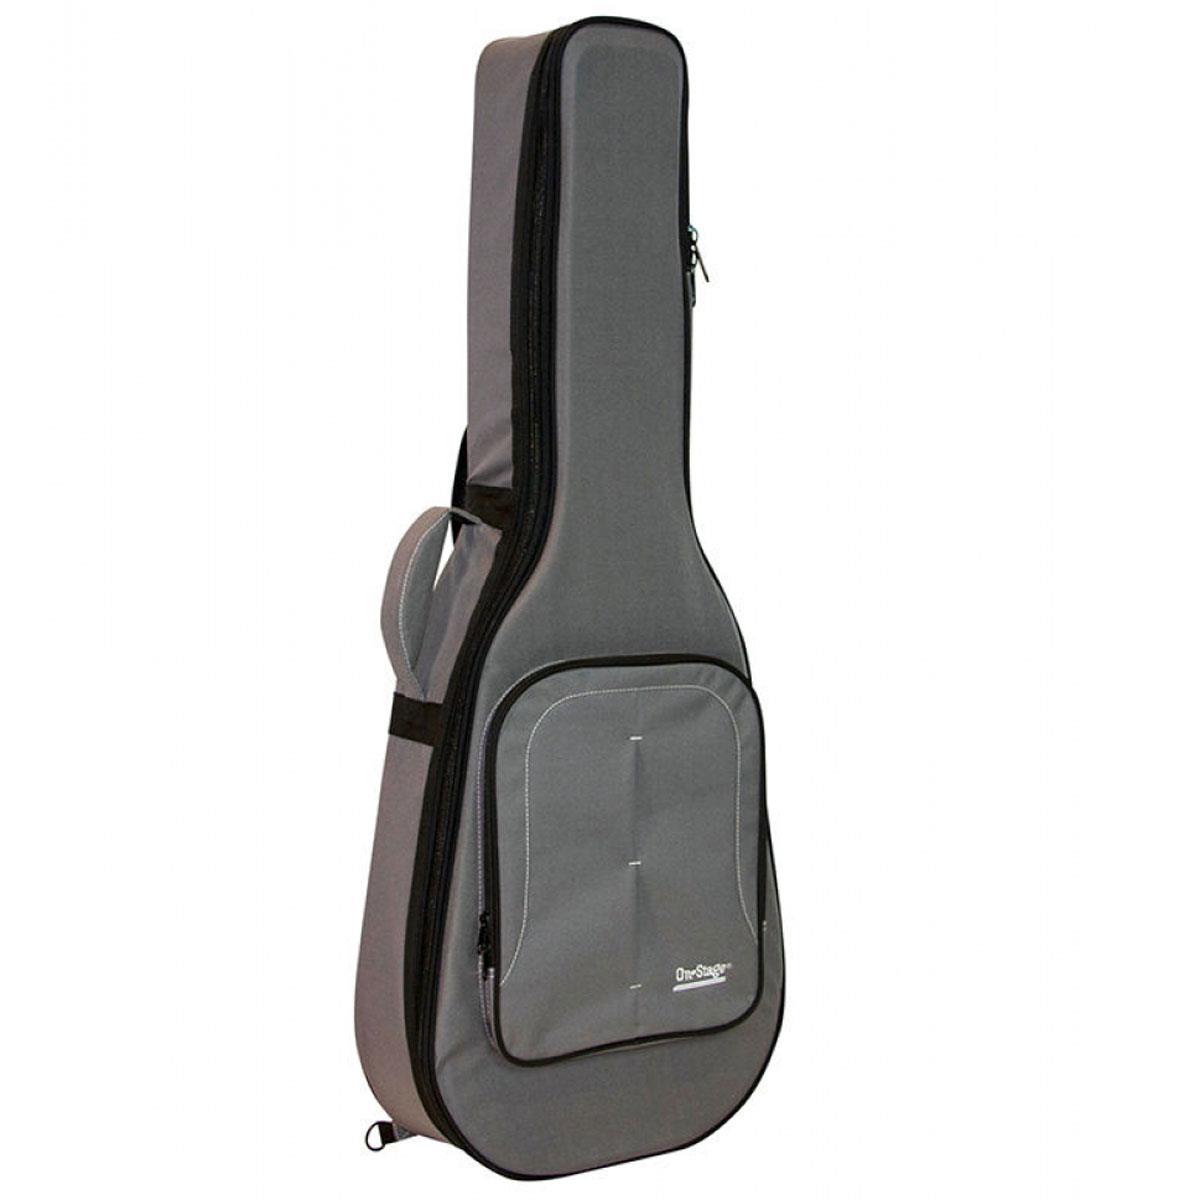 On-Stage GHE7550 Hybrid Electric Guitar Gig Bag, Charcoal Gray -  14581